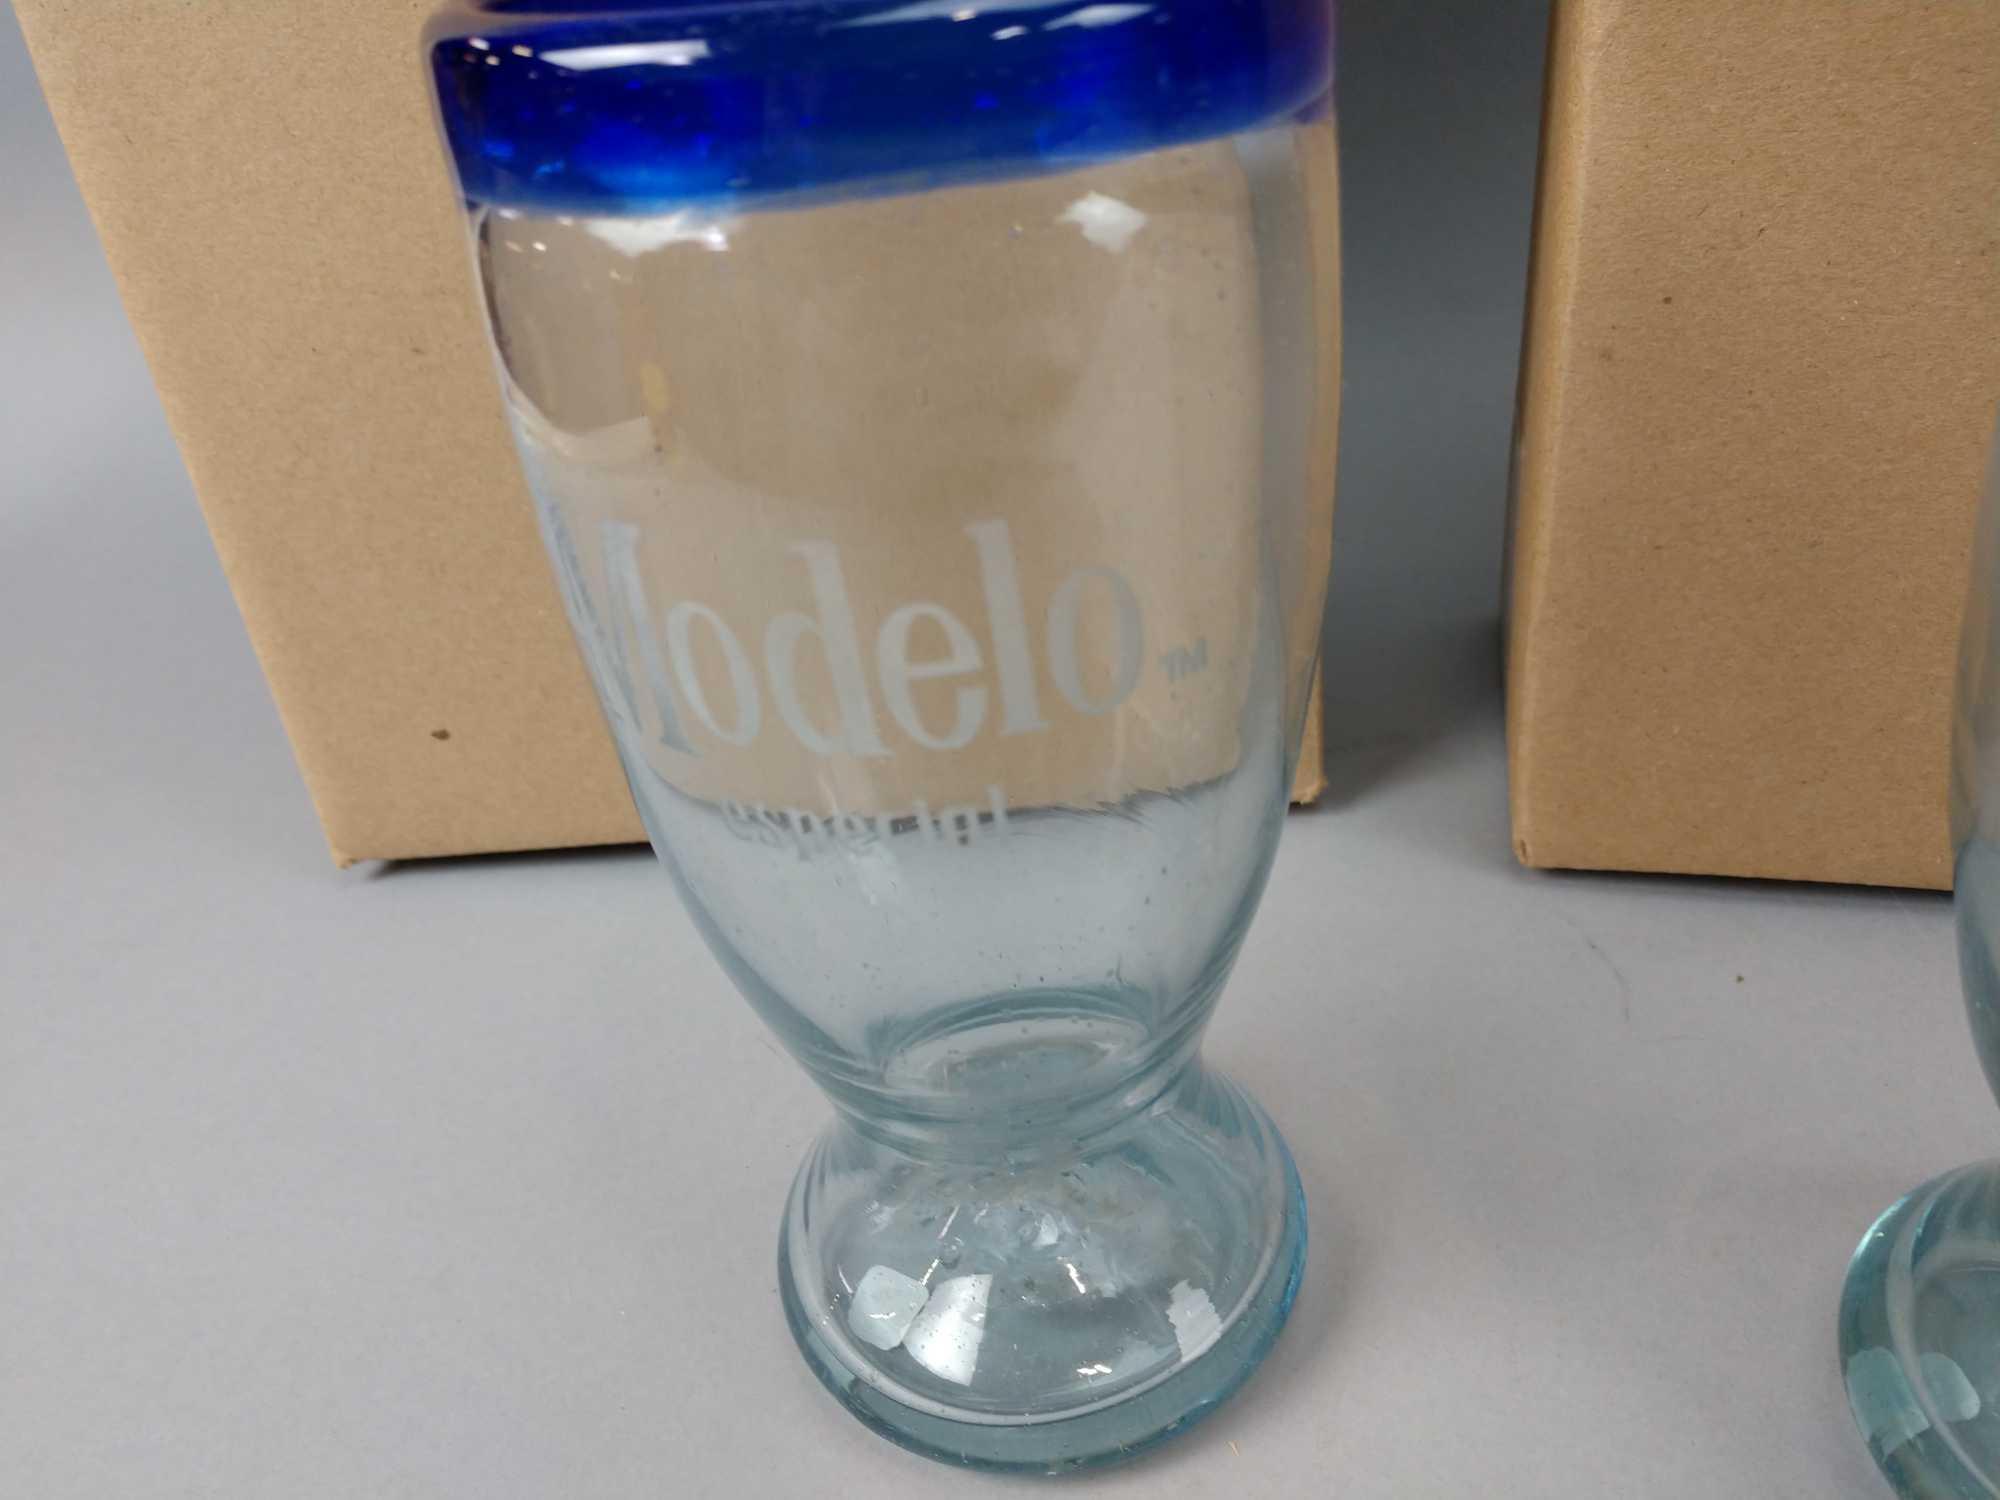 64 NEW 2 Piece Modelo Especial Beer Glass Sets